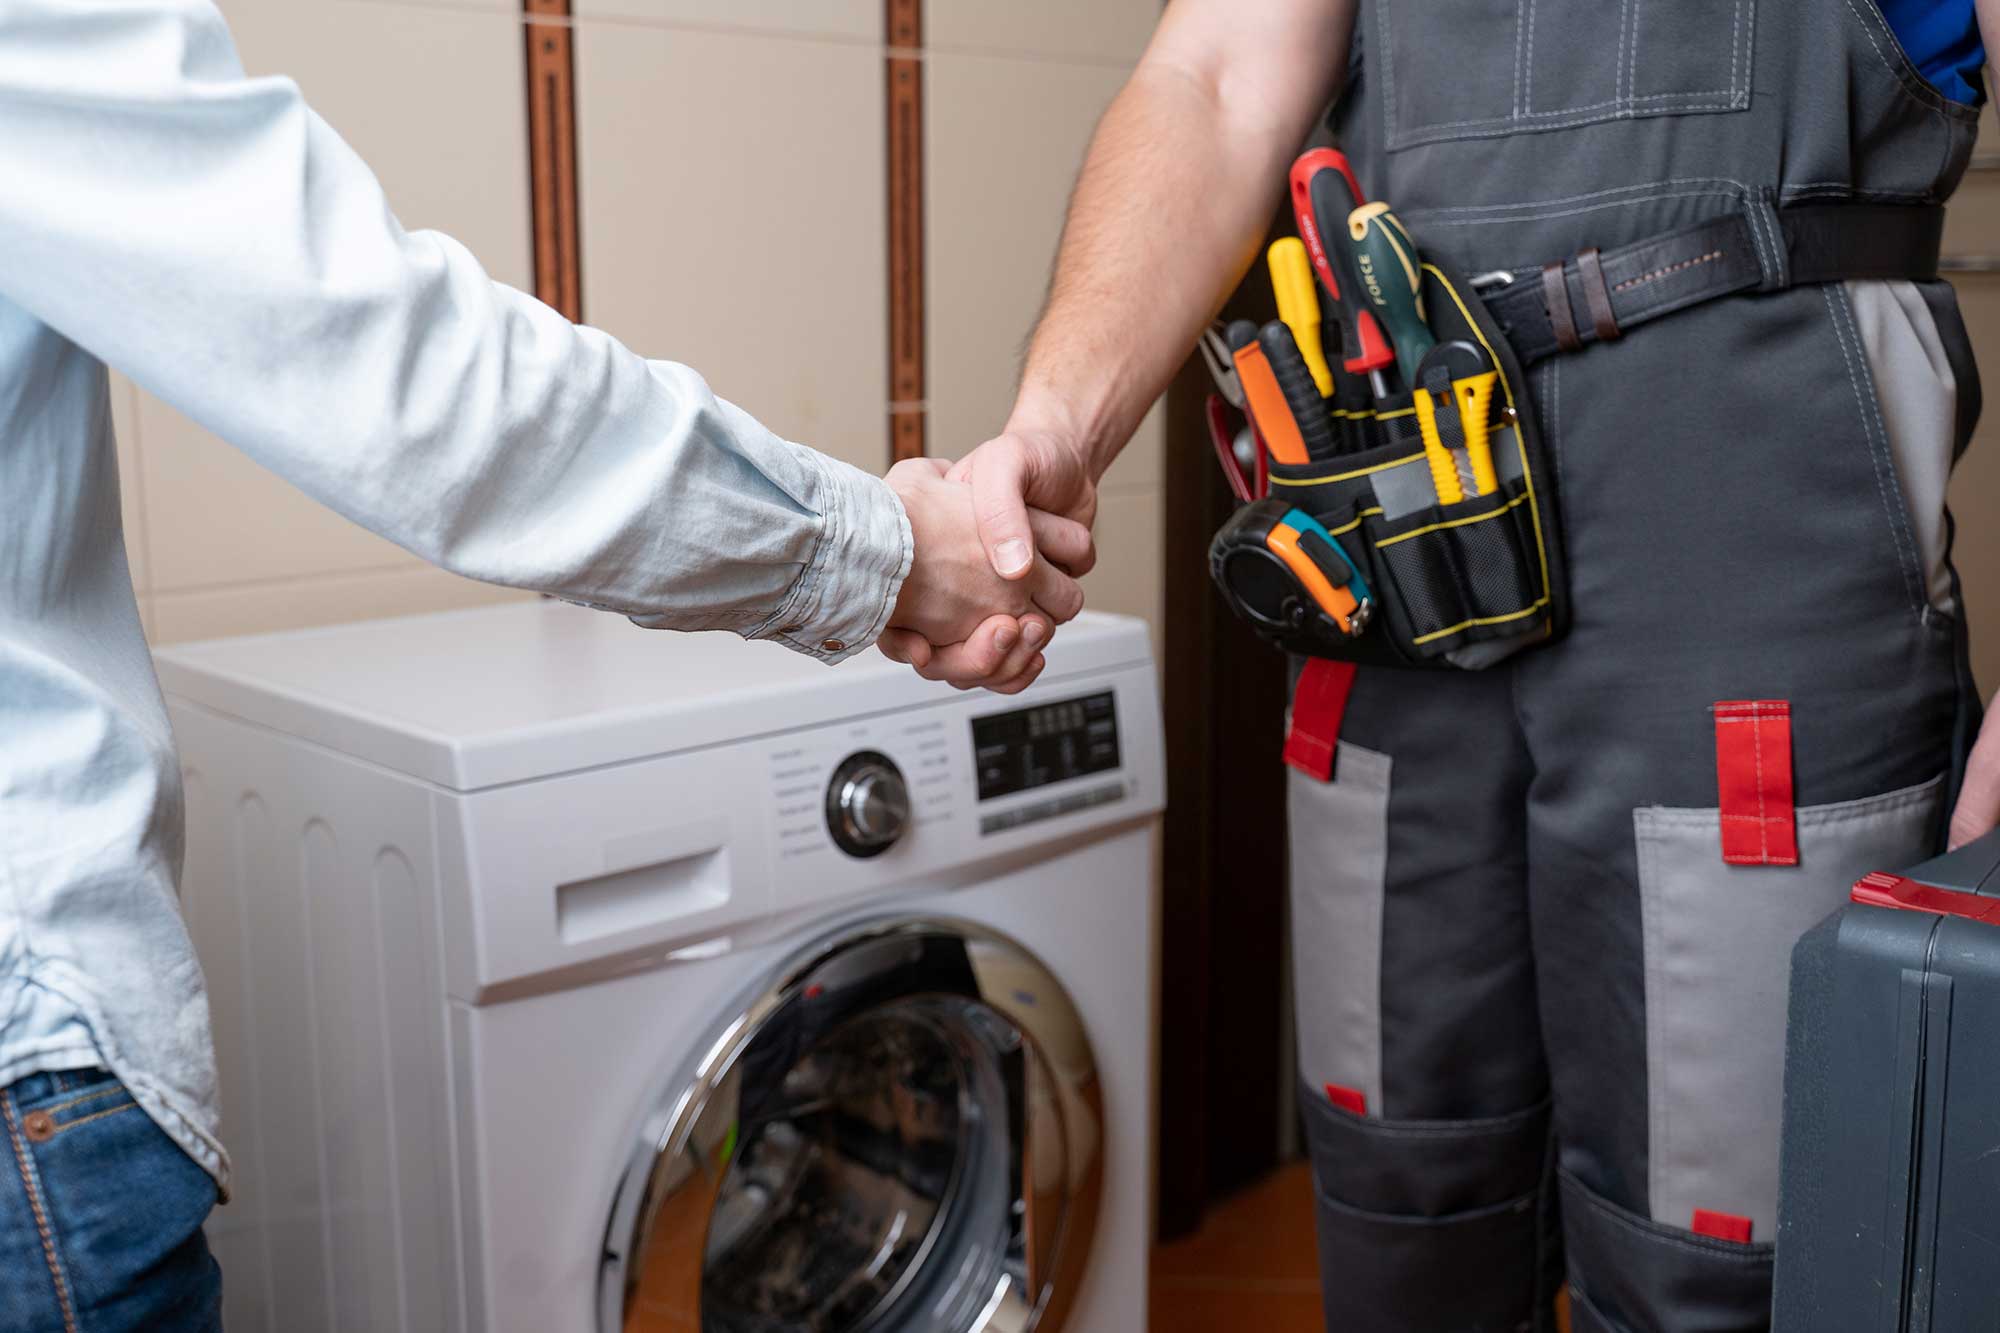 Professional Handyman Services in Northern Virginia